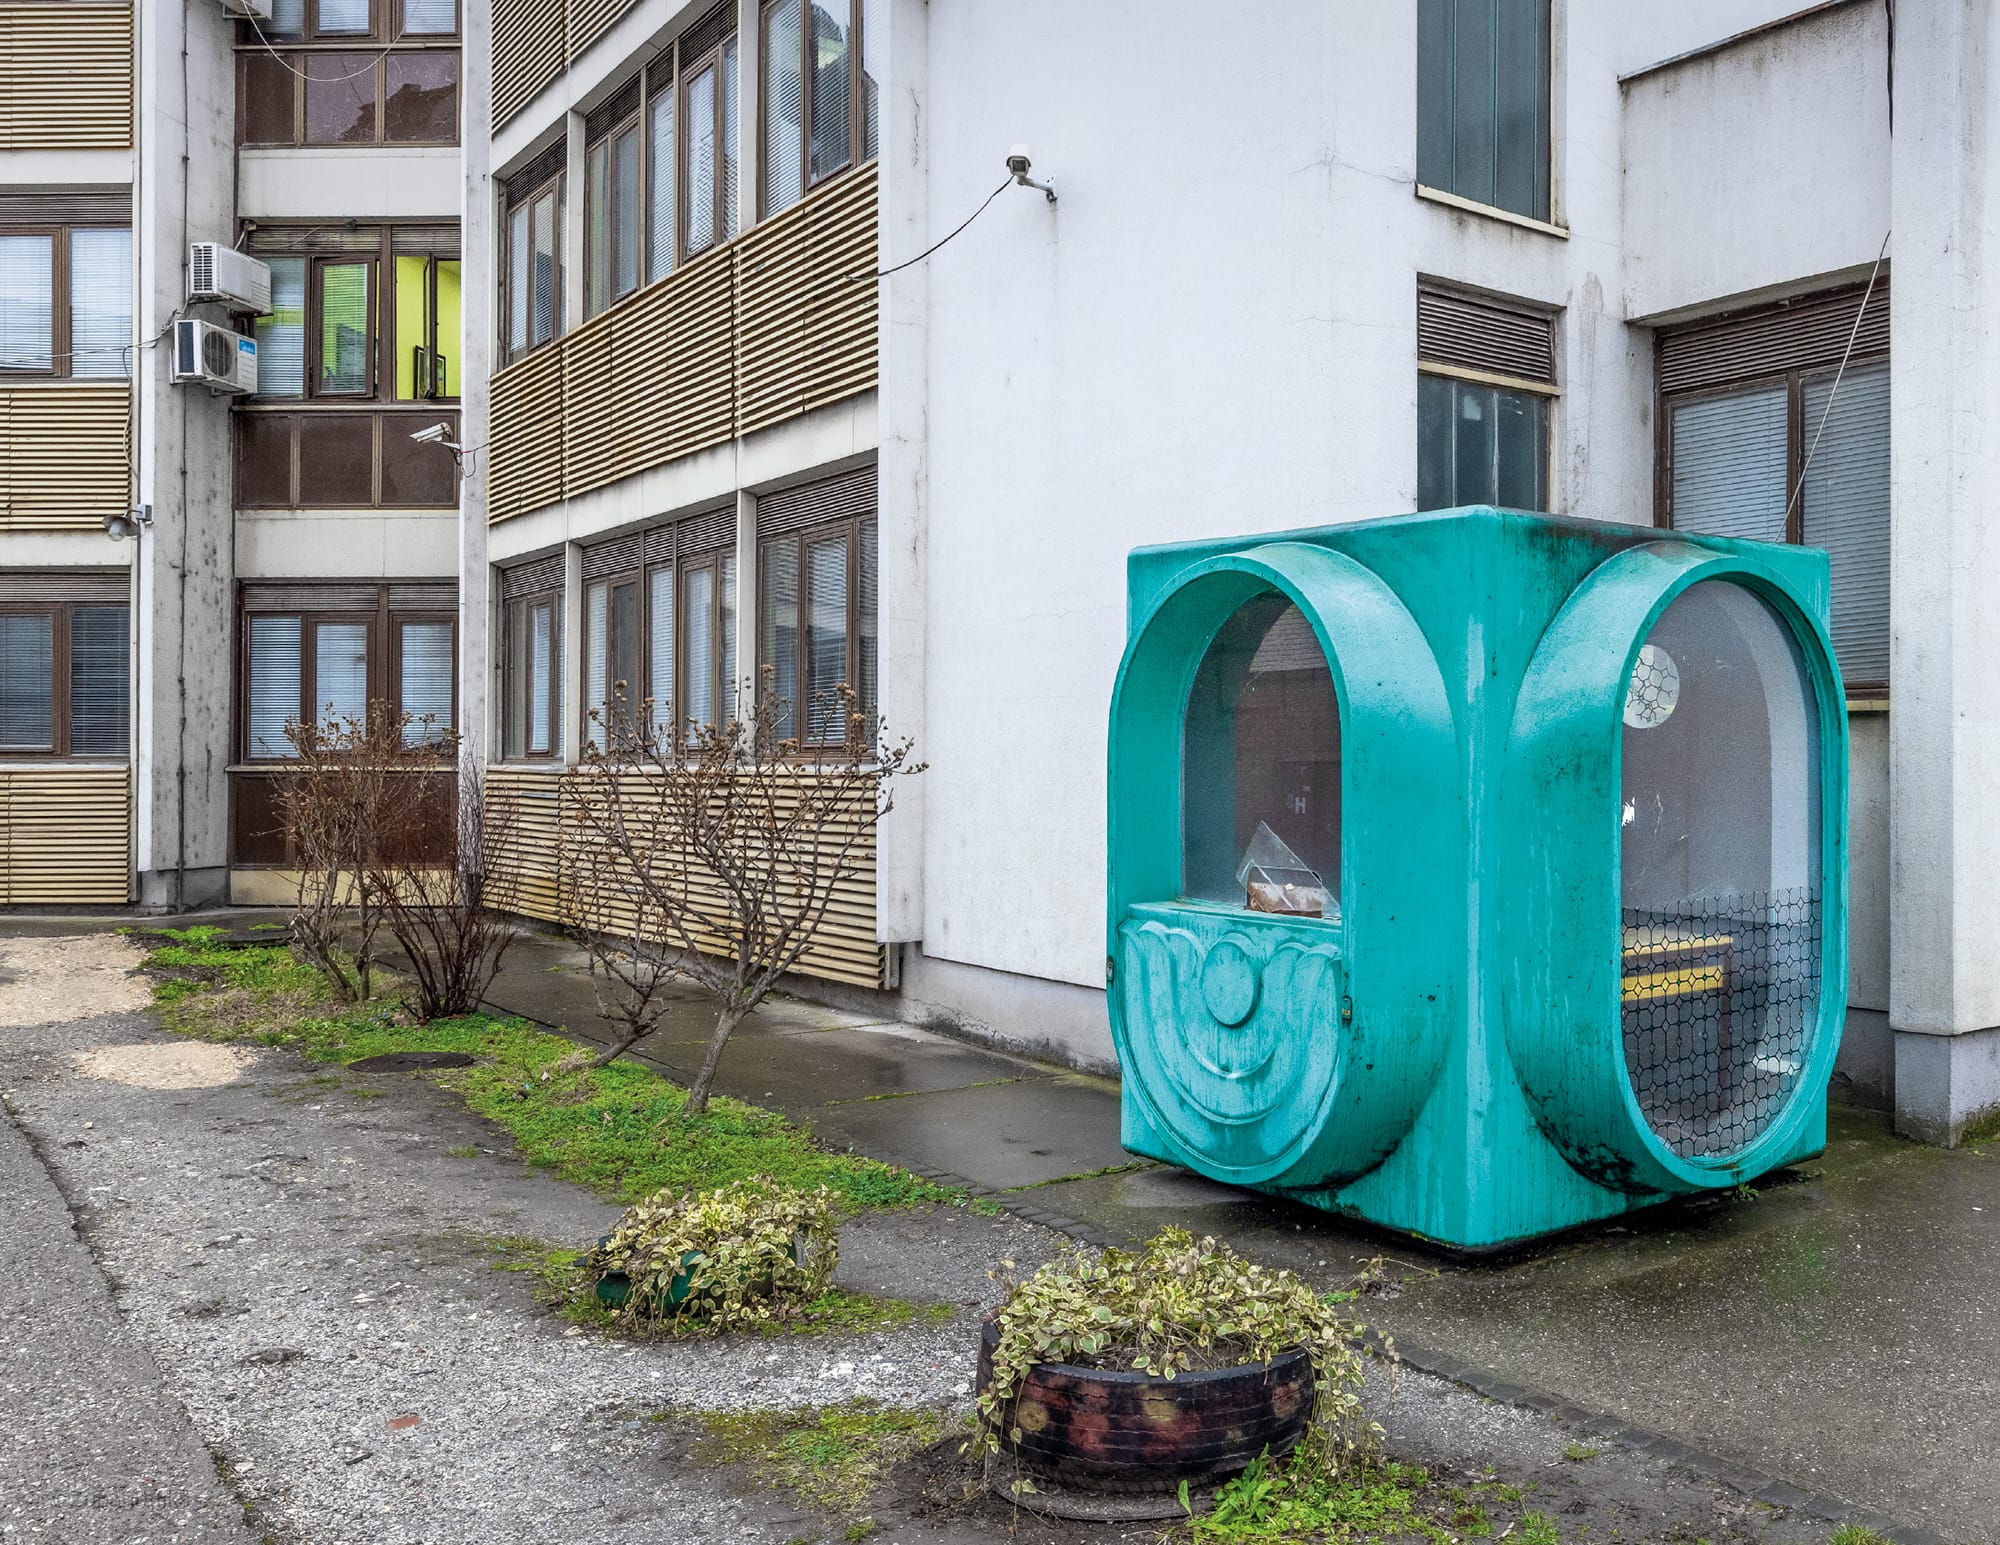 a turquoise, modernist kiosk in on a housing estate in Serbia